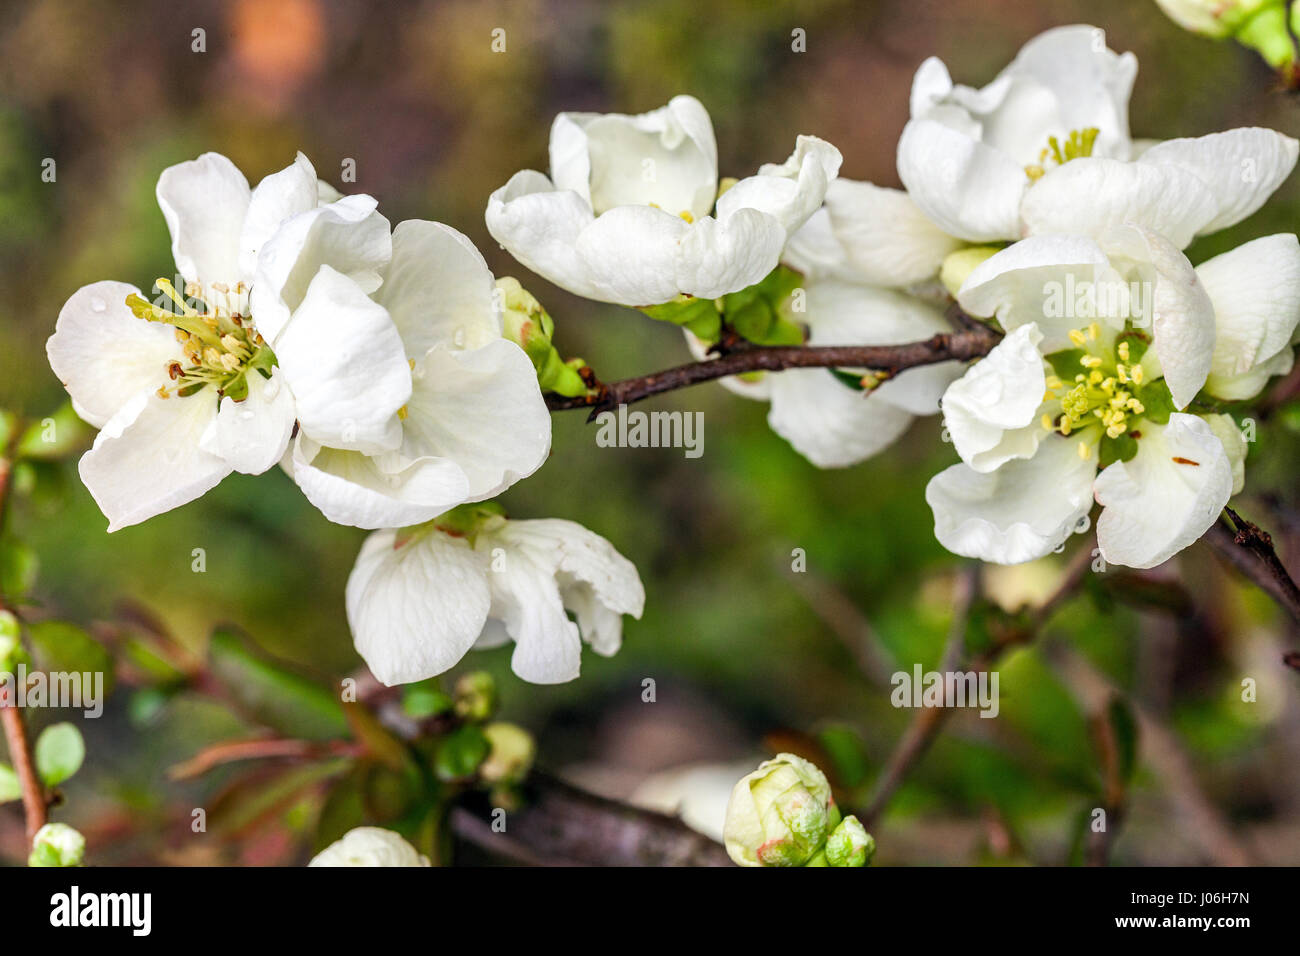 White quince Chaenomeles Jet trail in a garden Stock Photo